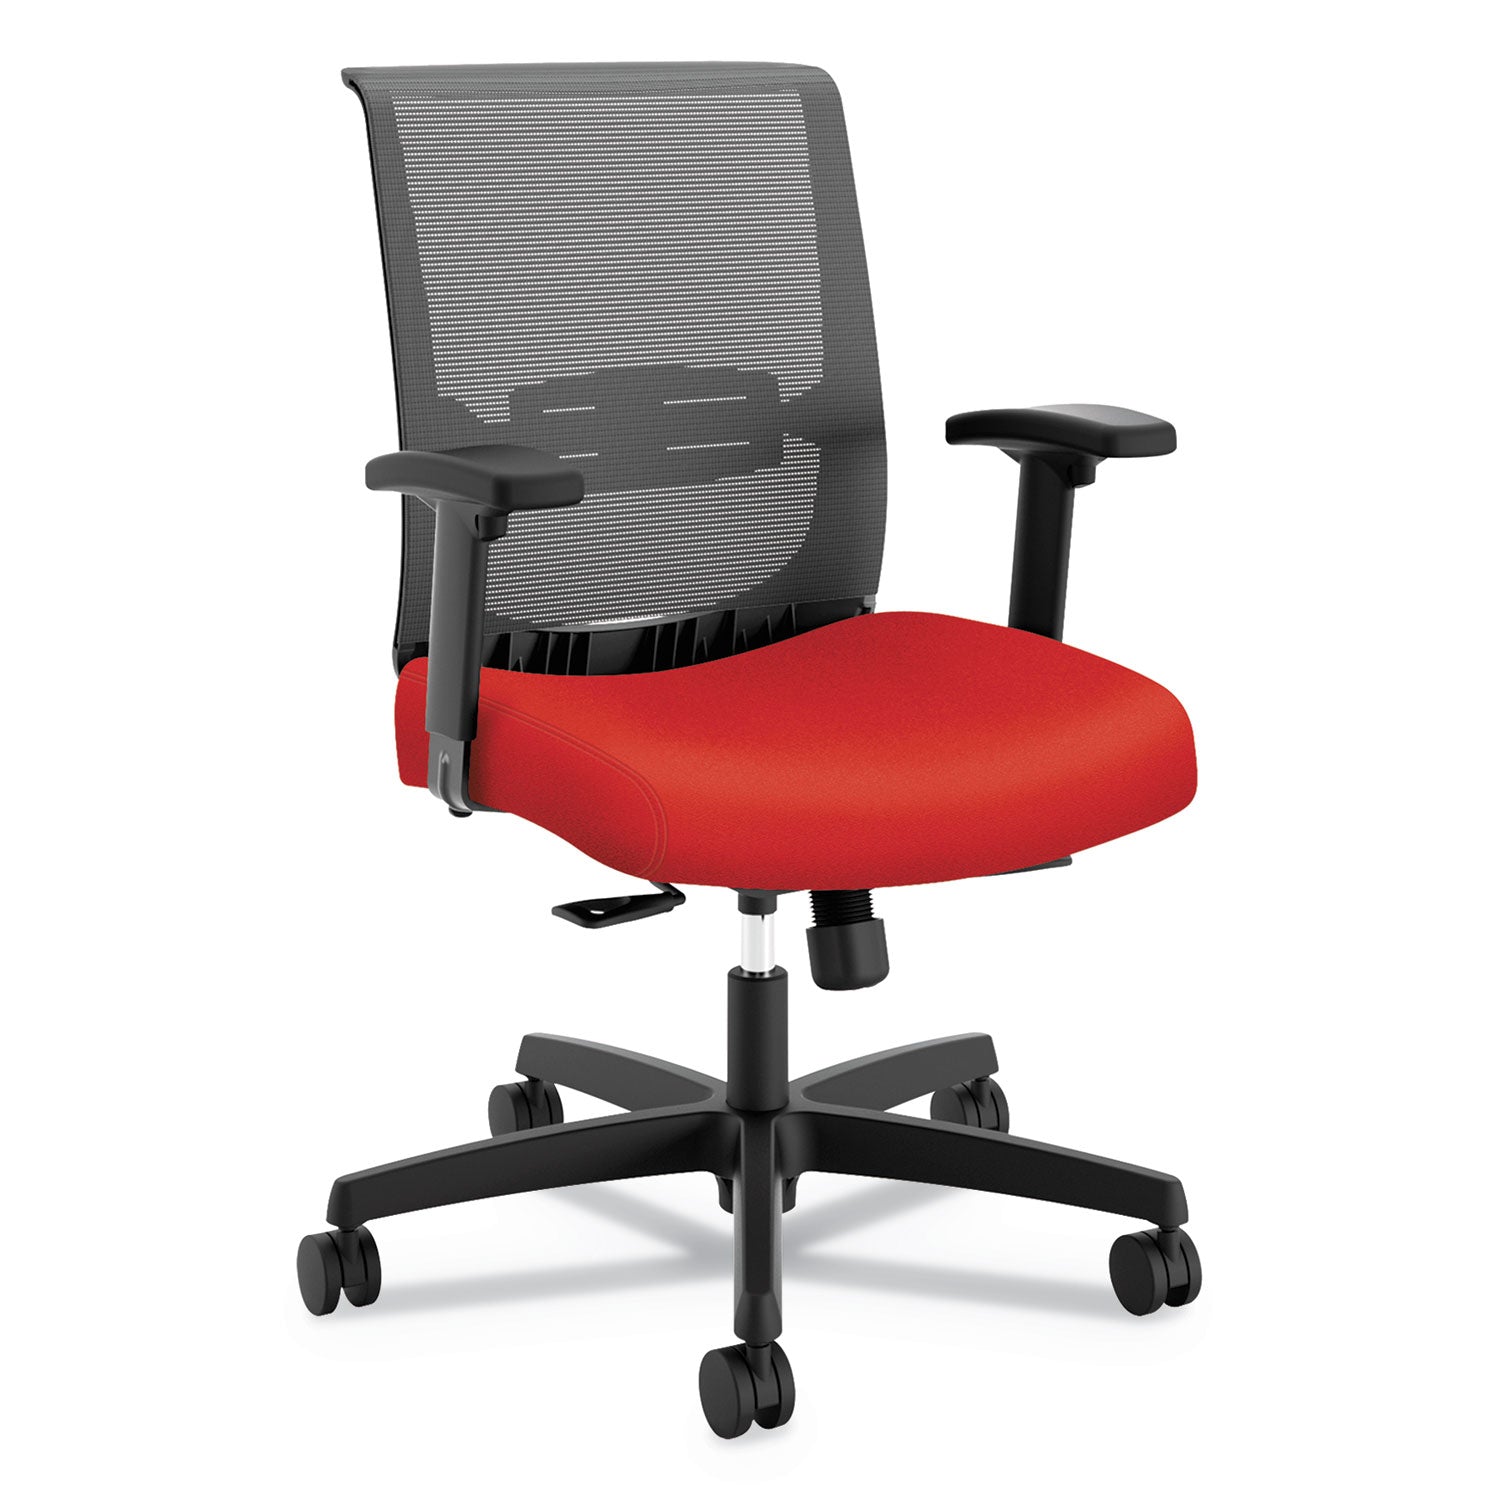 convergence-mid-back-task-chair-synchro-tilt-and-seat-glide-supports-up-to-275-lb-red-seat-black-back-base_honcmy1acu67 - 1